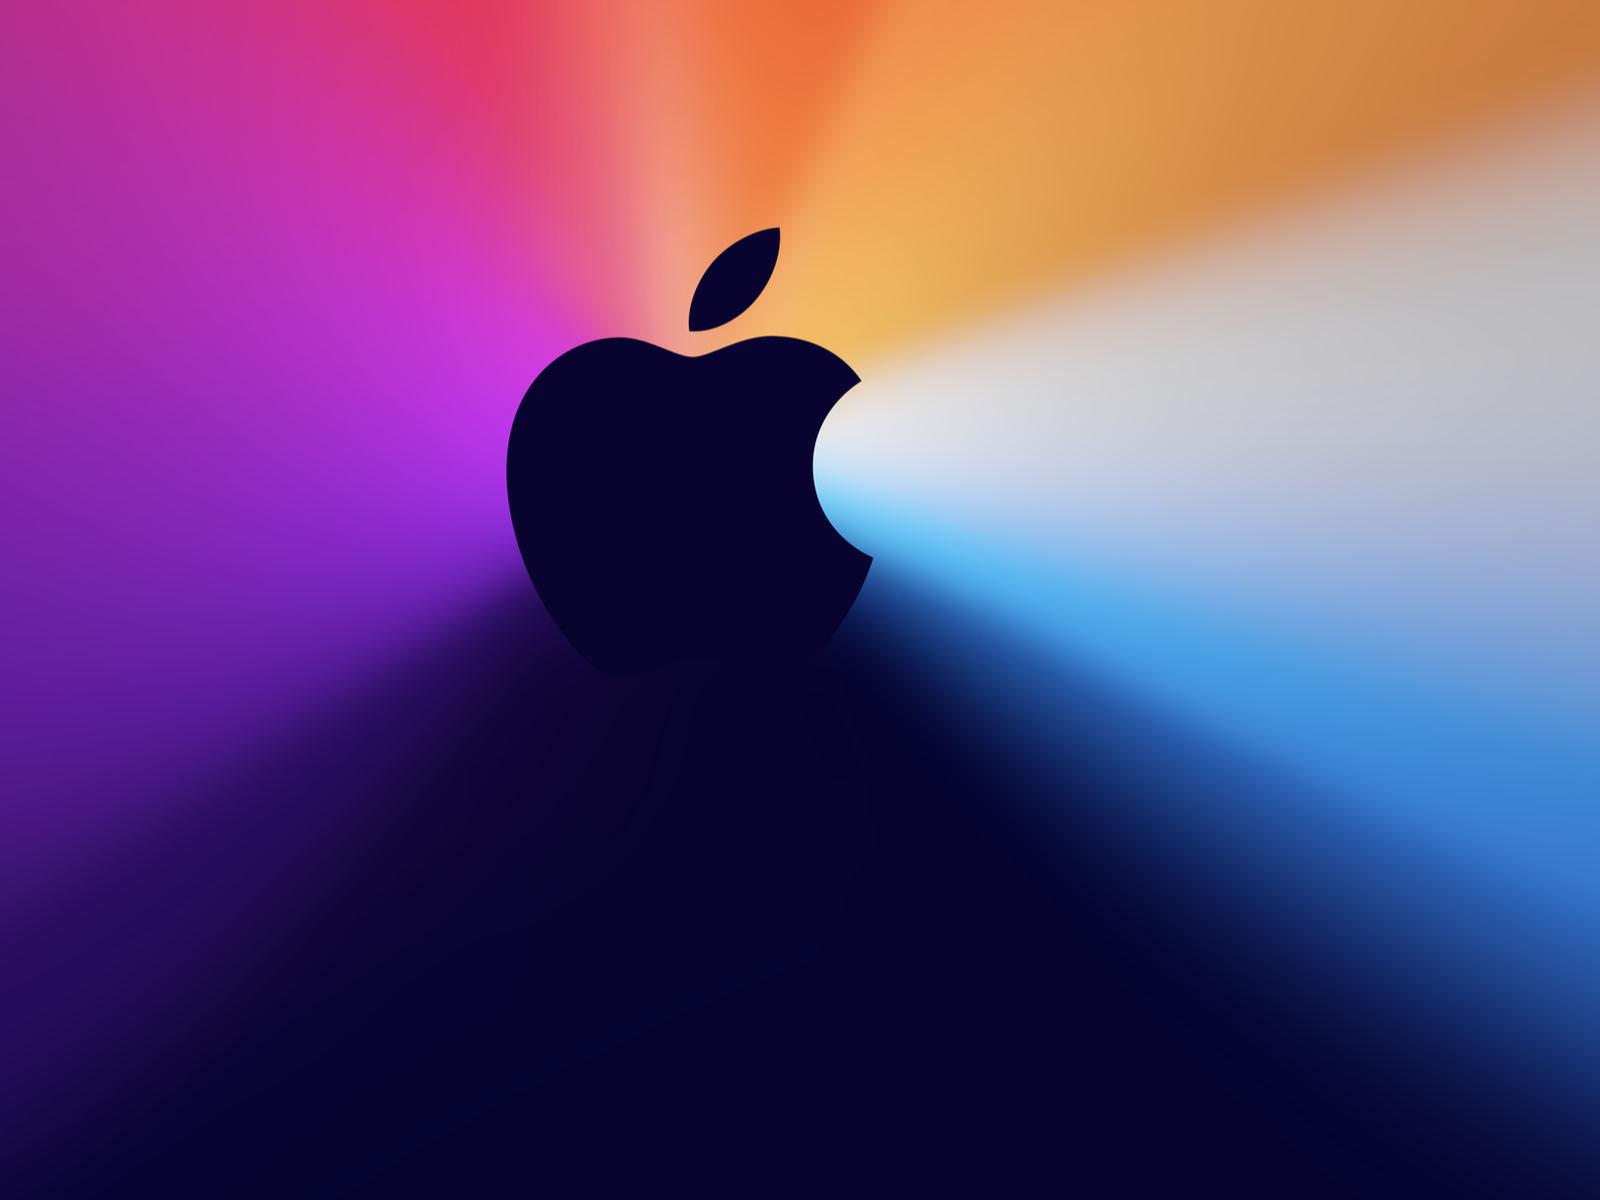 March 23 Apple Event Rumored To Unveil New Ipad Pro Airpods 3 And Airtags Macrumors